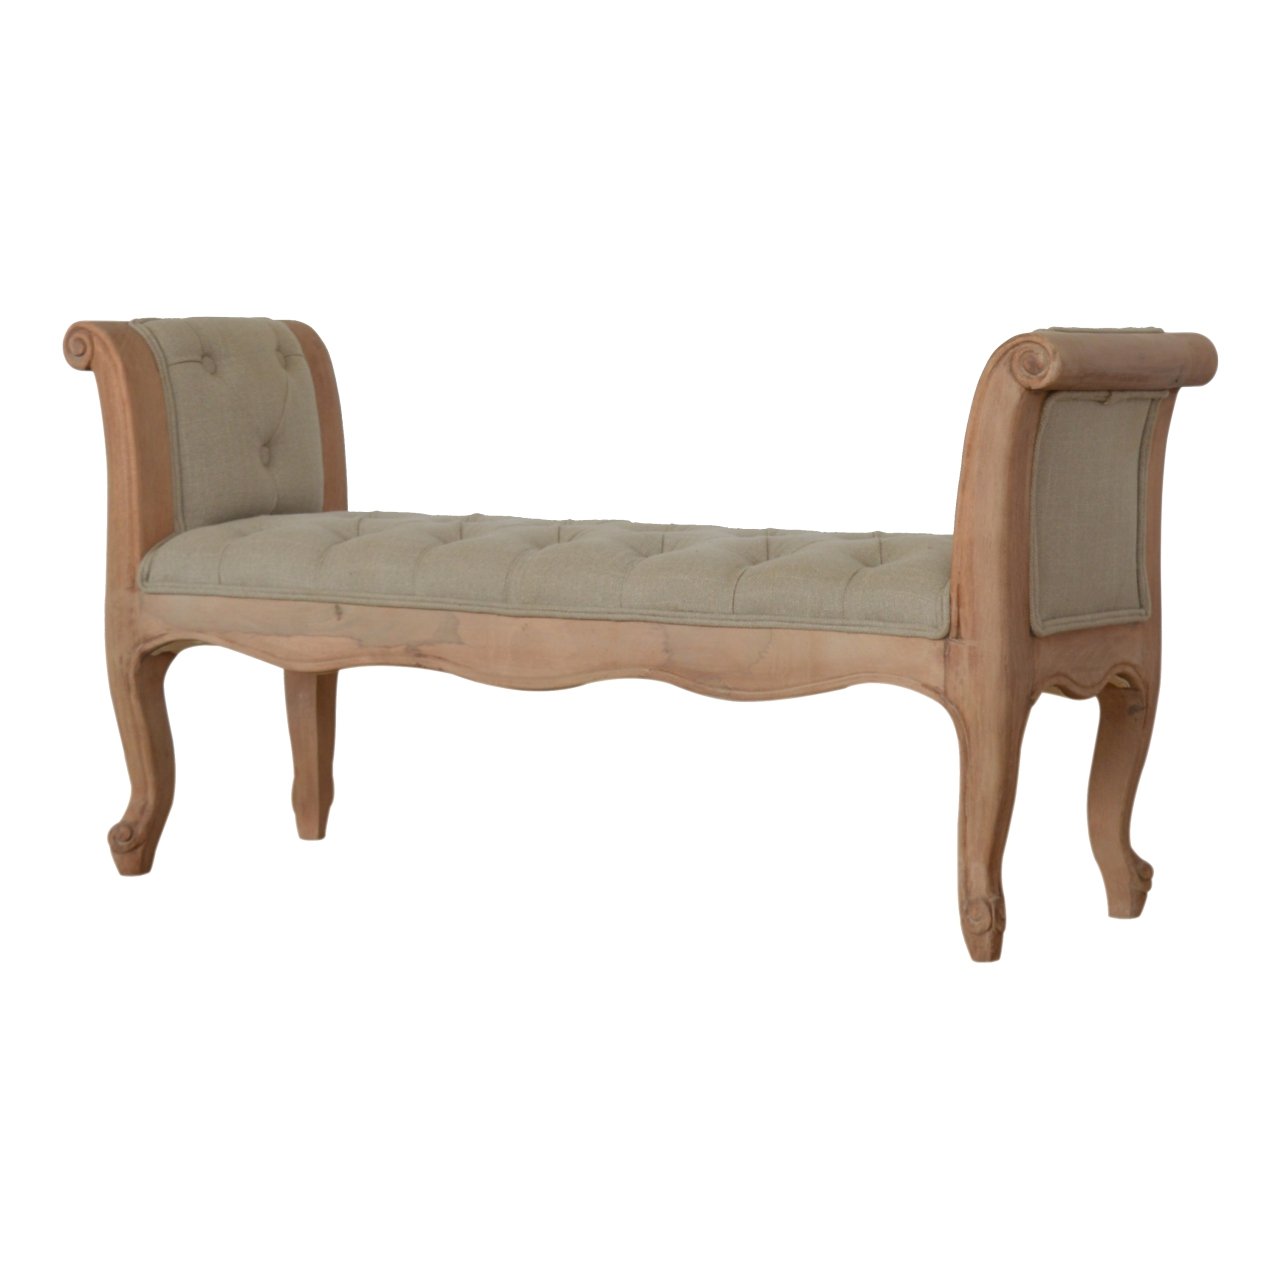 French-Inspired Solid Wood Bench at Kulani Home